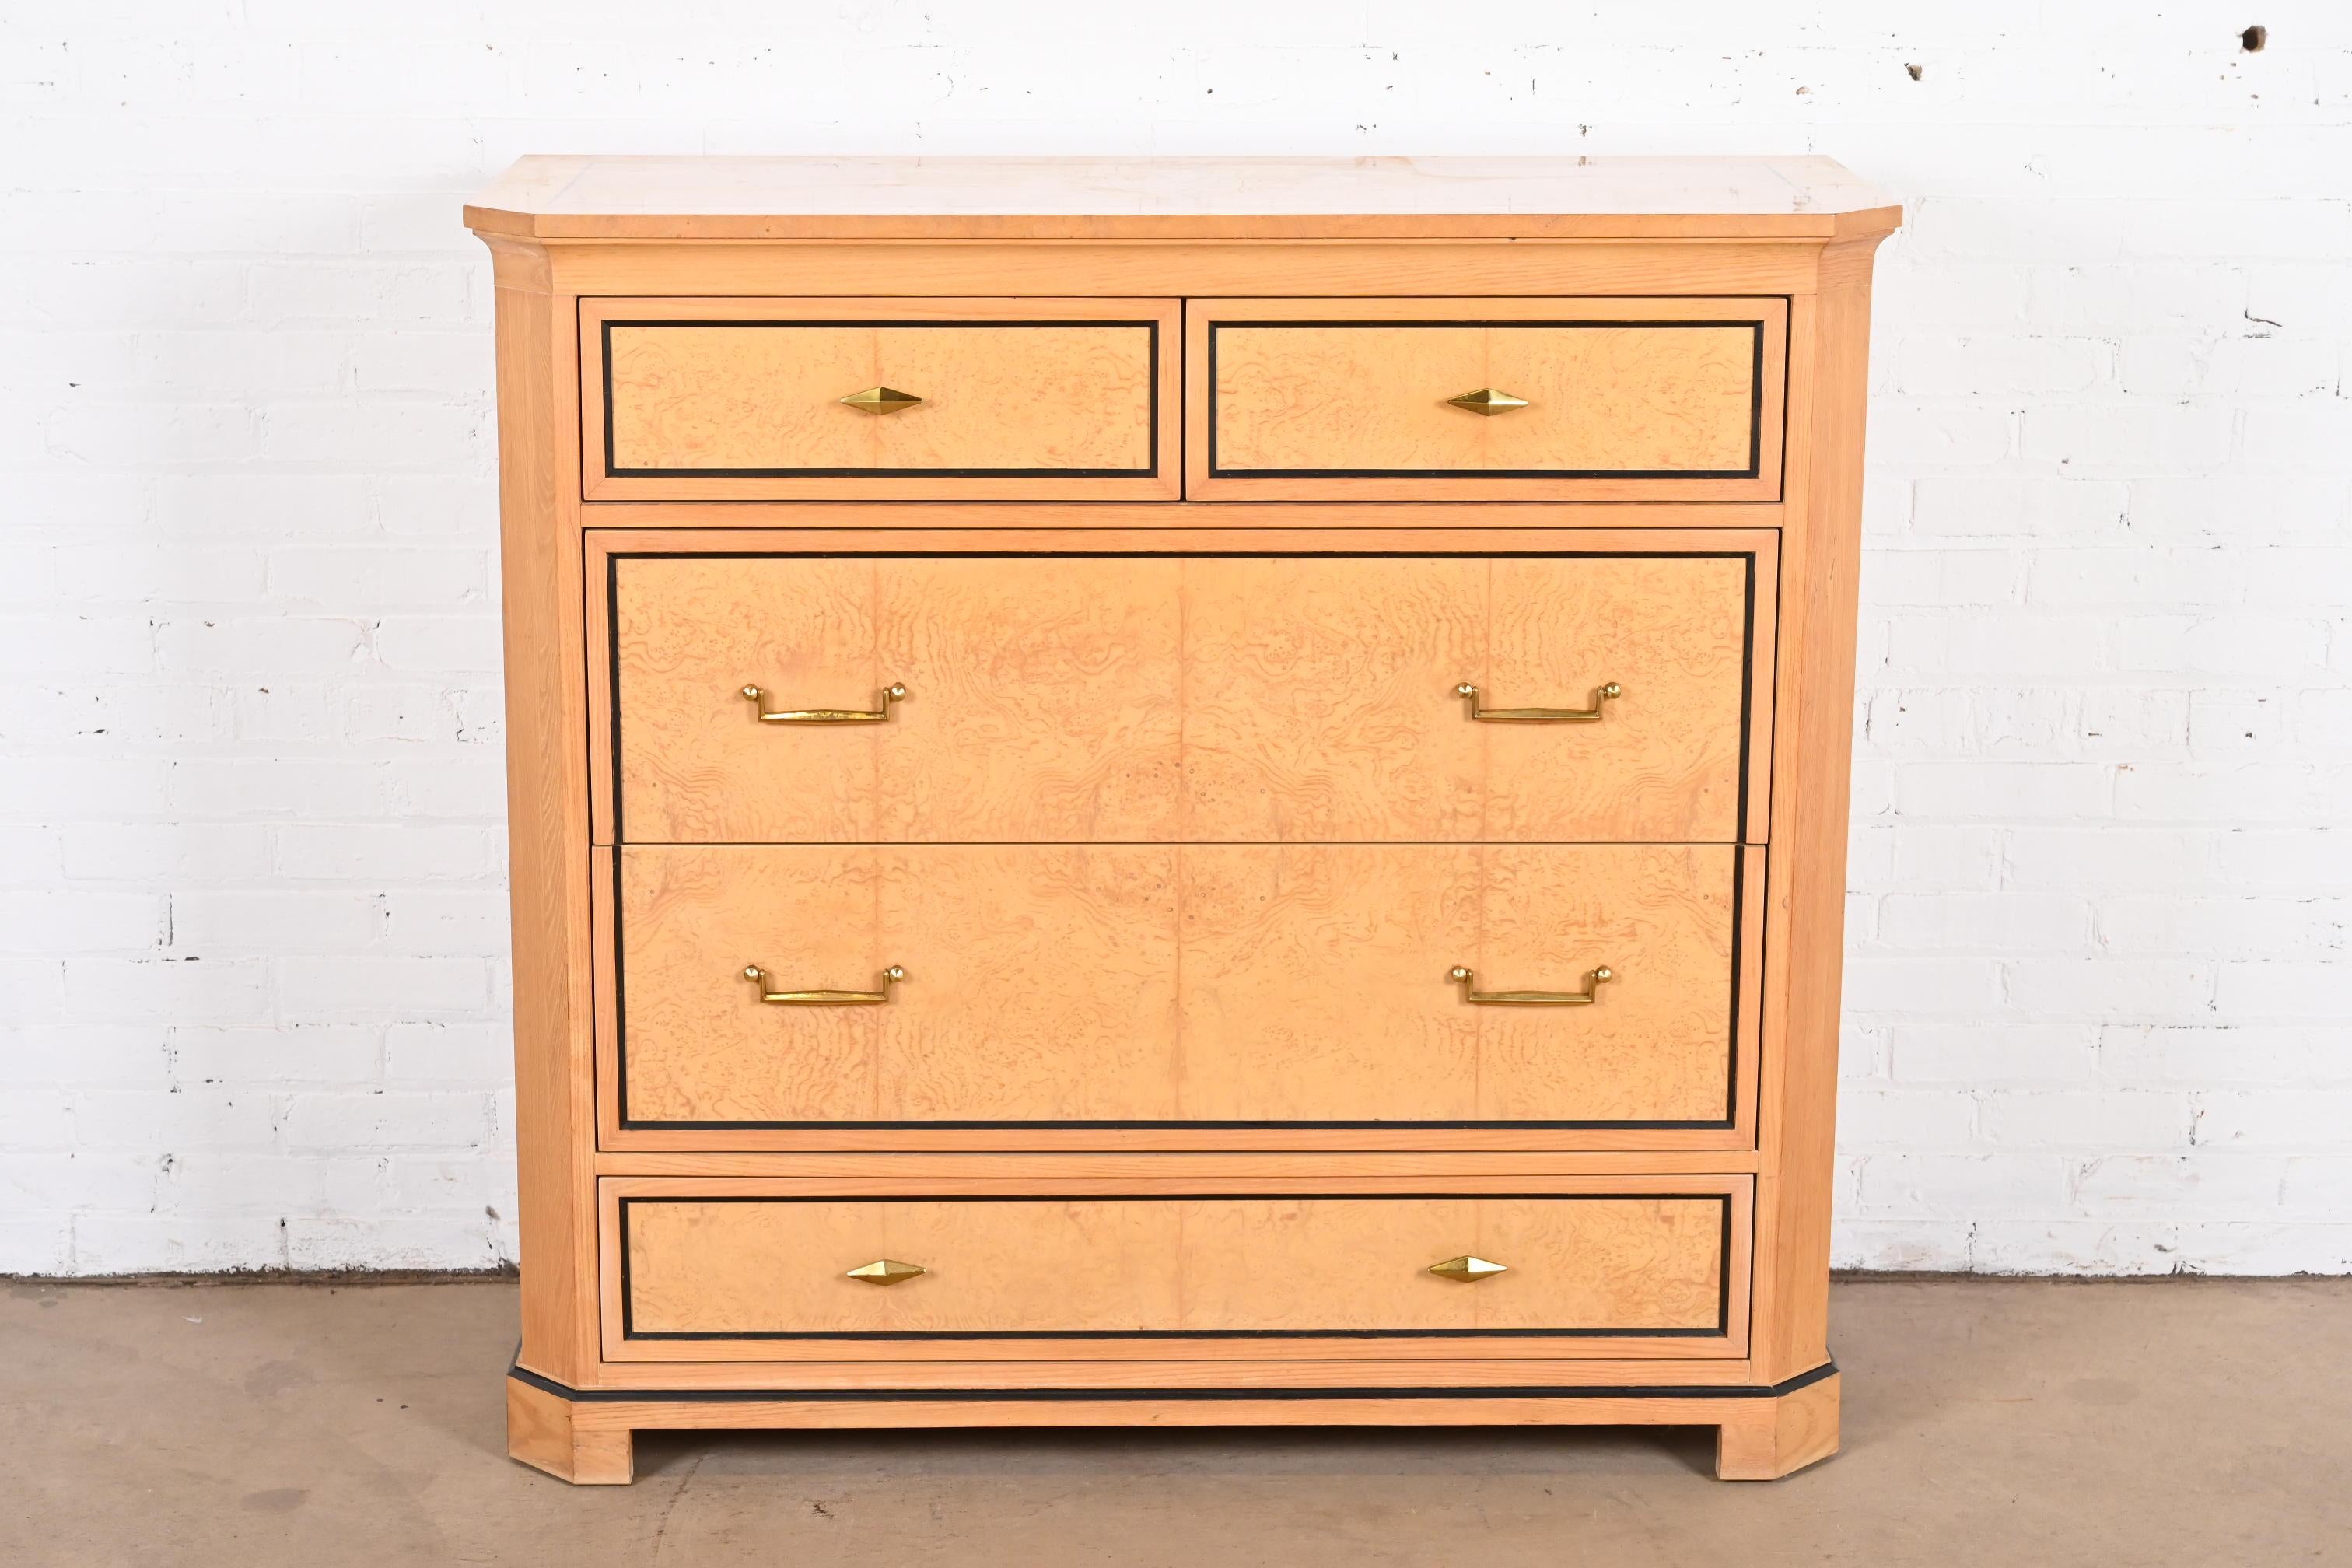 A gorgeous Biedermeier or neoclassical style dresser or chest of drawers

By century Furniture

USA, late 20th century

Oak, with beautiful book-matched burl wood drawer fronts and top, ebonized trim, and original brass hardware.

Measures: